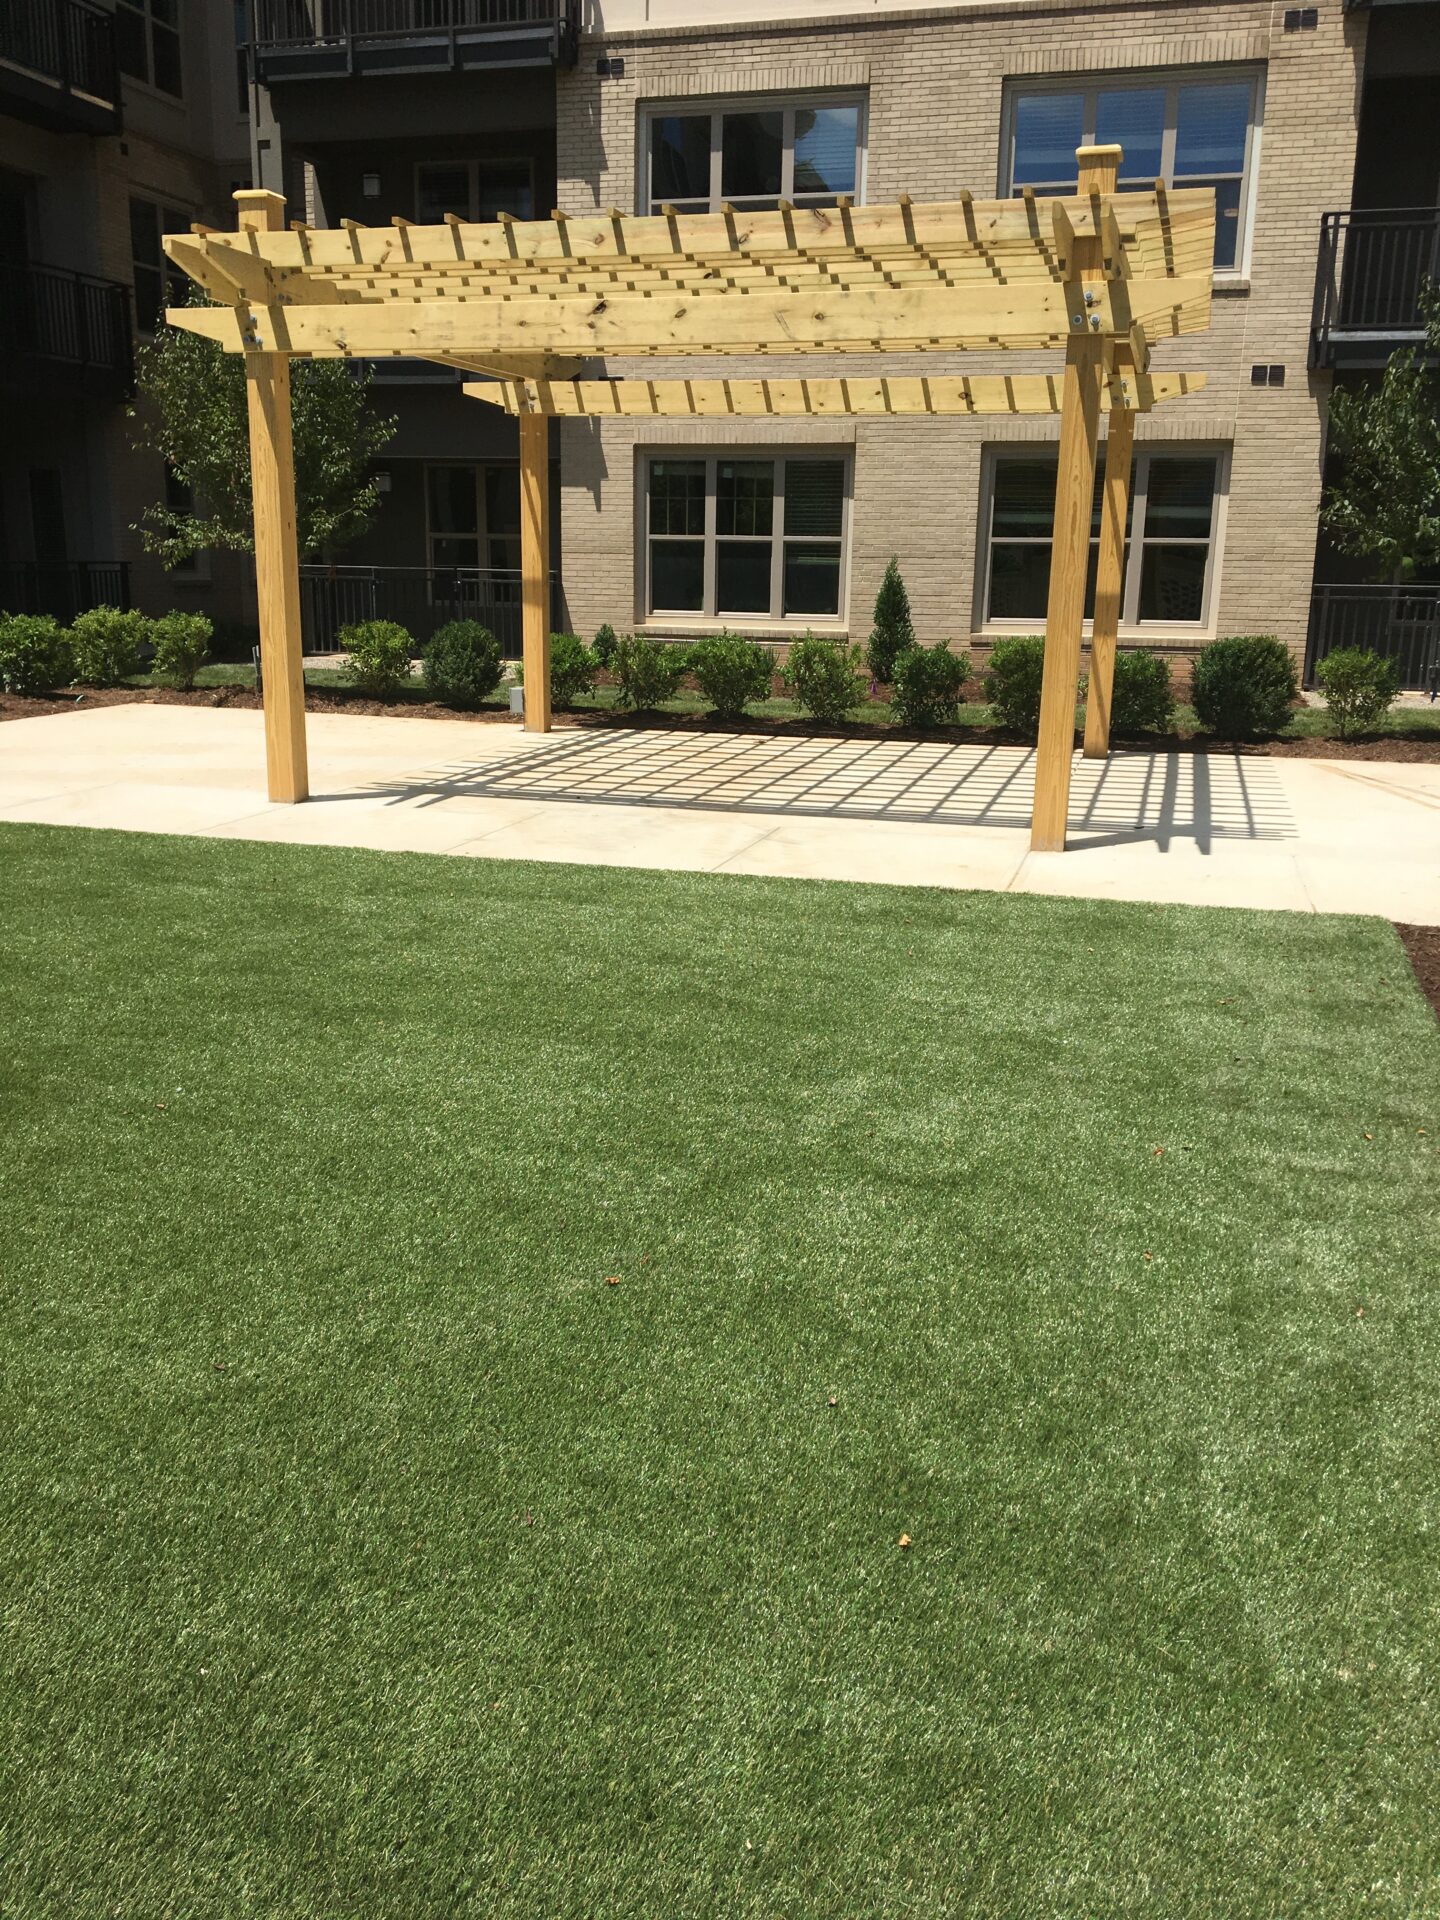 The image shows a well-manicured green lawn in front of a residential building with a modern pergola and a patterned pavement area underneath.